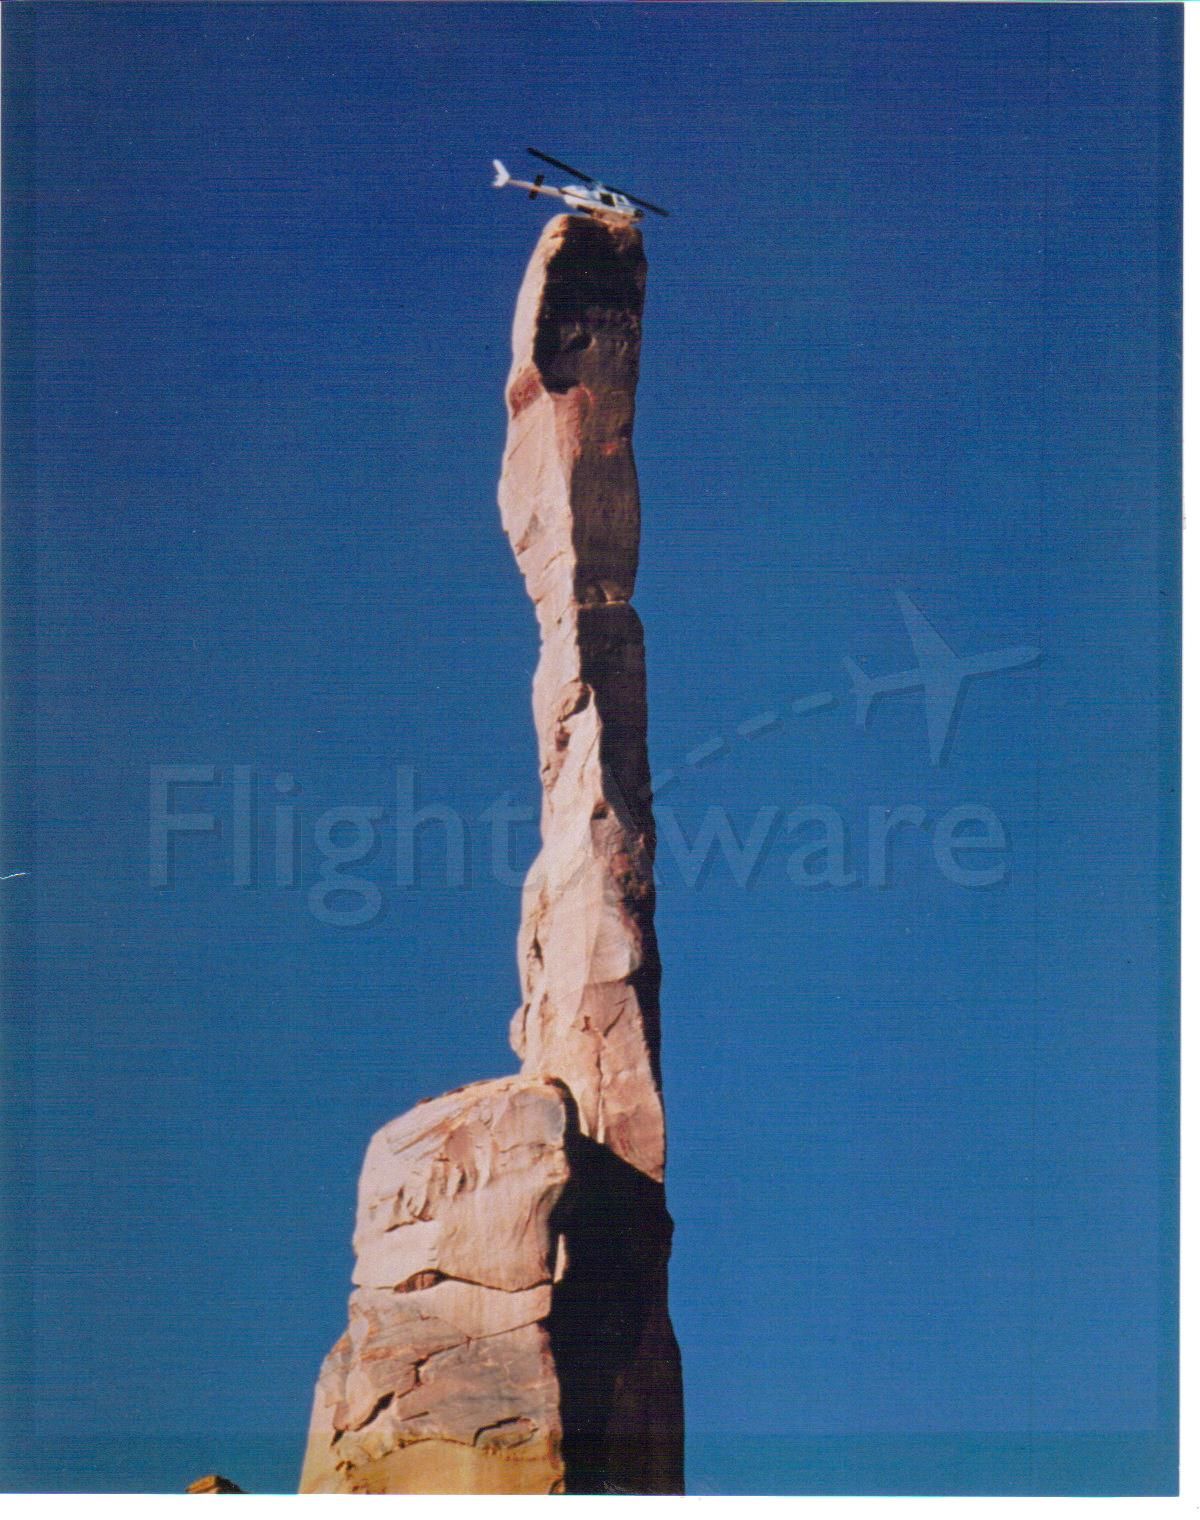 N855B — - The Totem Pole, Monumet Valley, AZ.  The last helicopter allowed to land by the Navajo Indian Tribe.  Two guys got out!